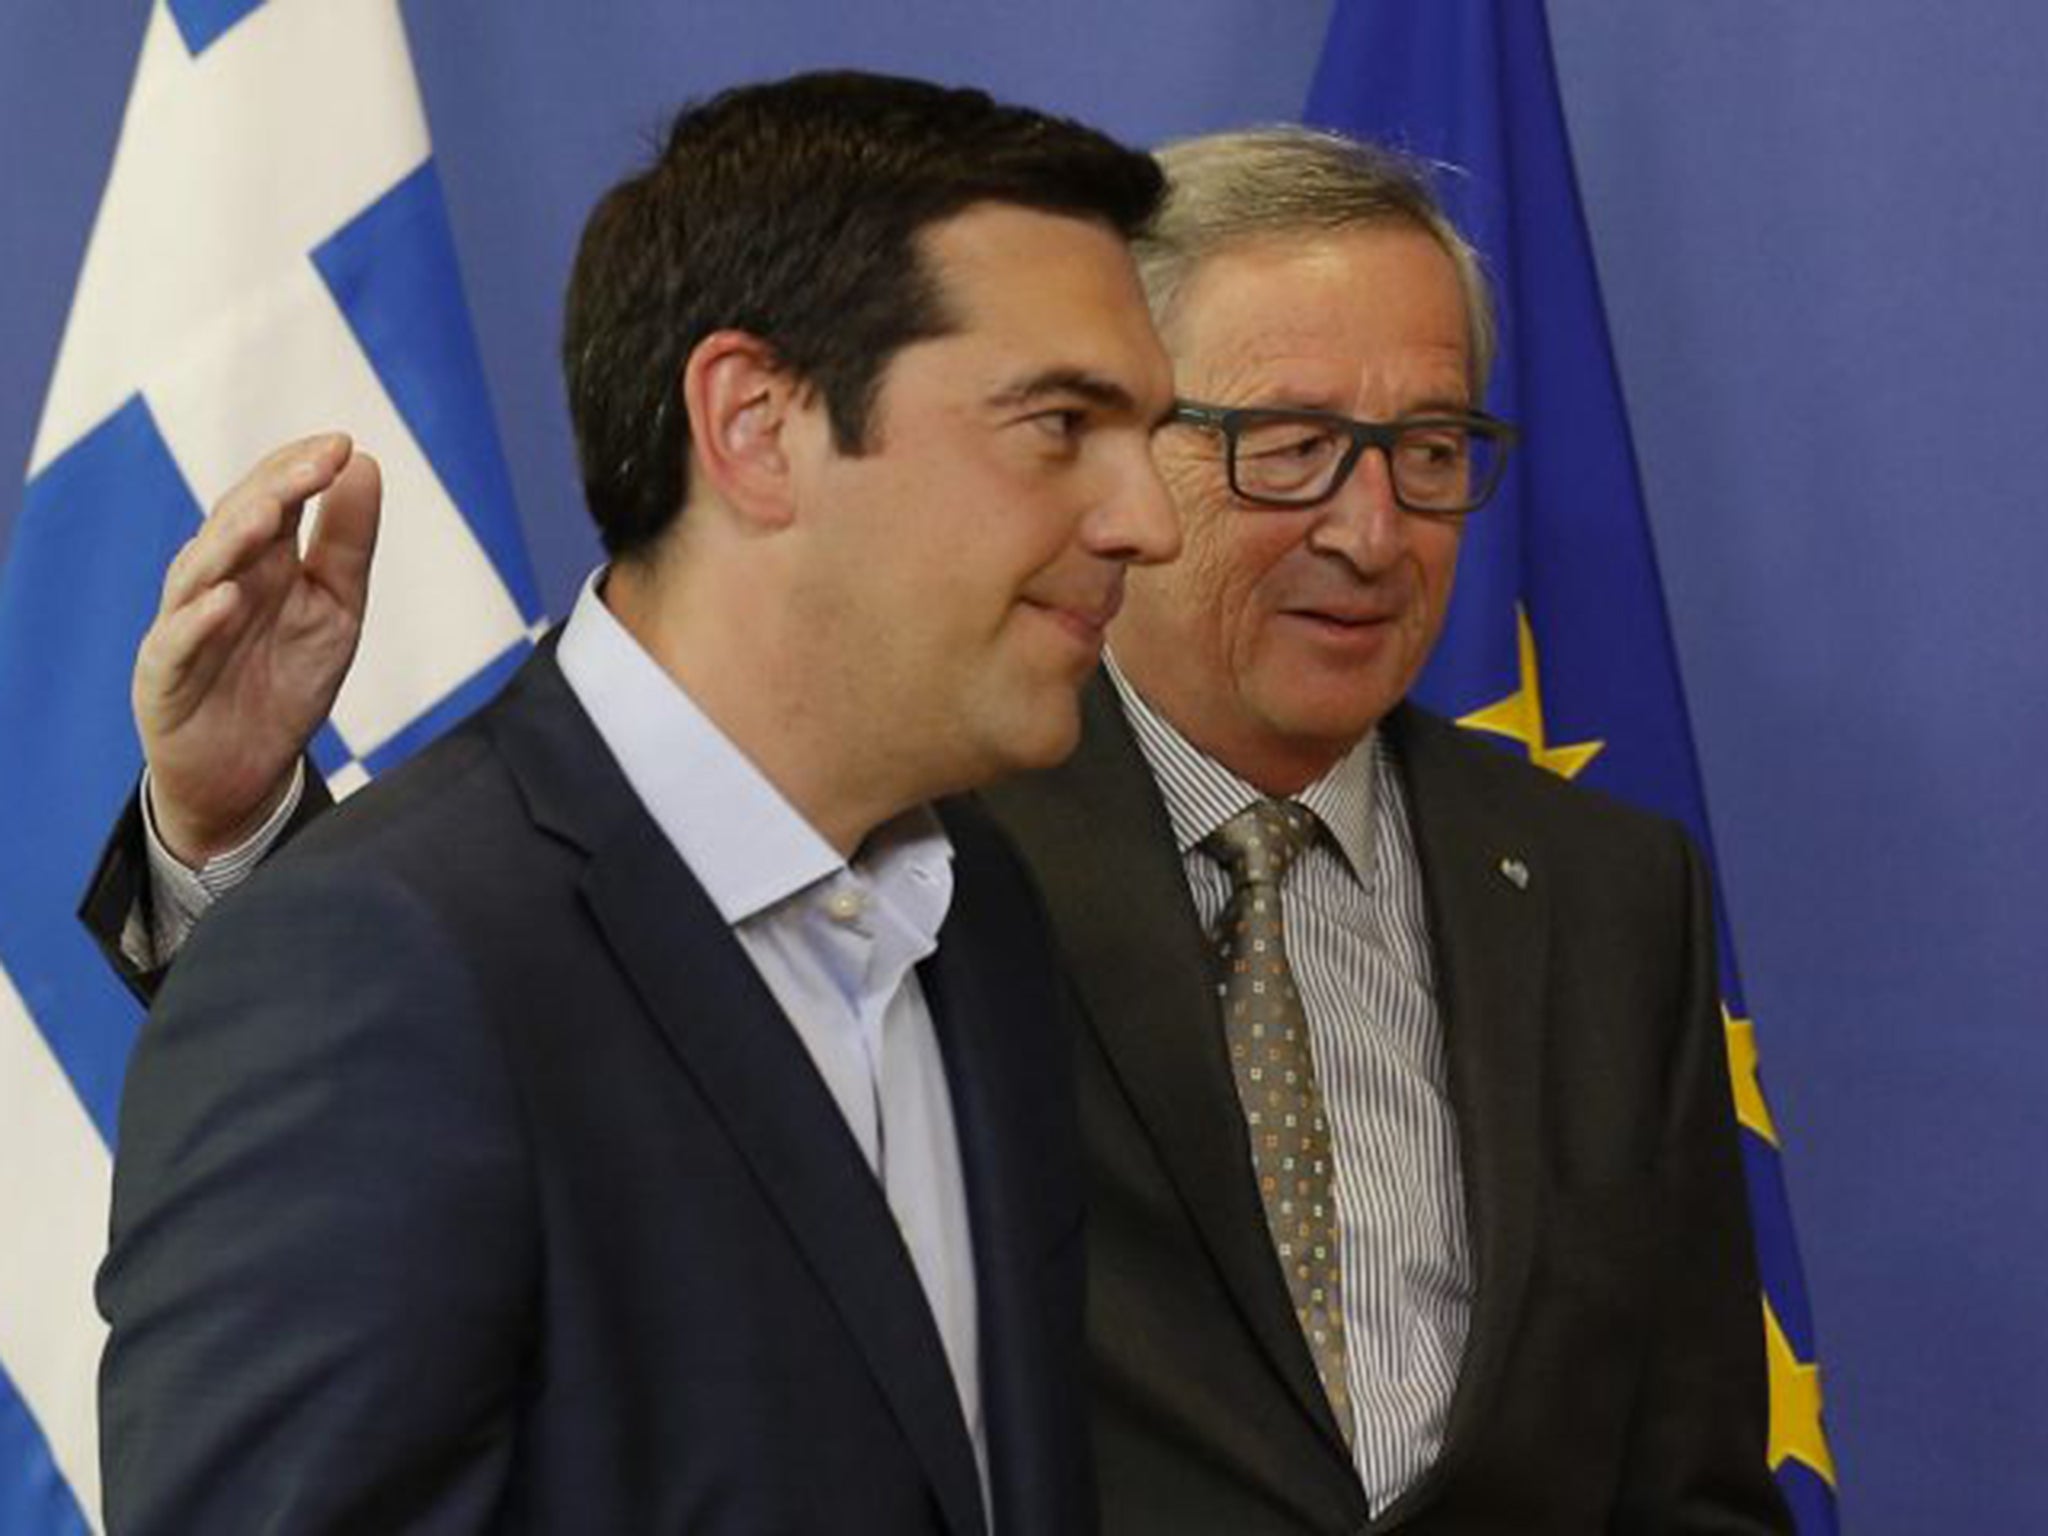 Alexis Tsipras and Jean-Claude Juncker, the head of the European Commission, failed to break the impasse of Greece’s debt crisis